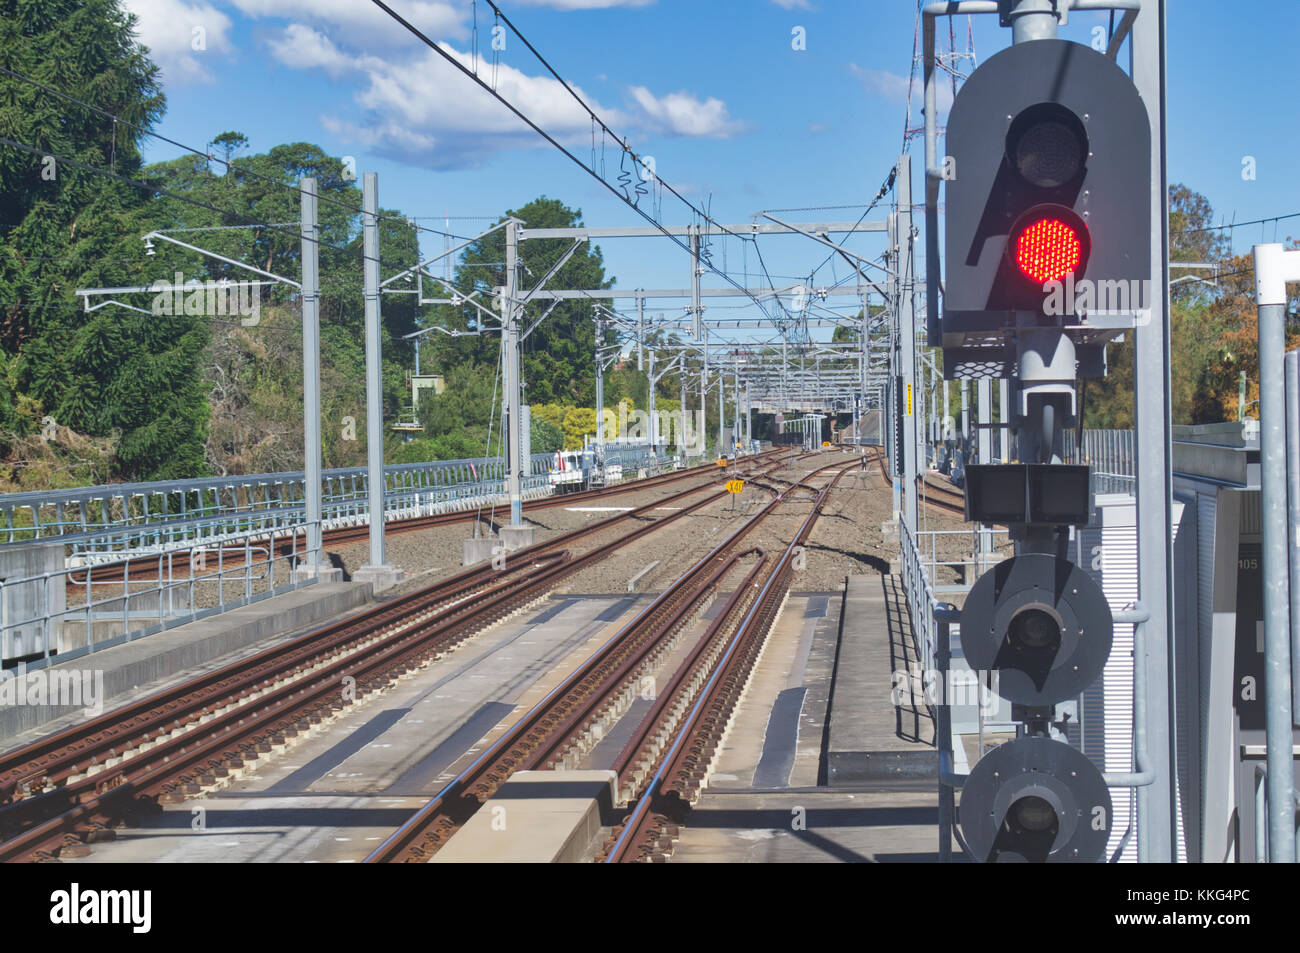 Railroad tracks going to the city as seen from a station platform. Stock Photo